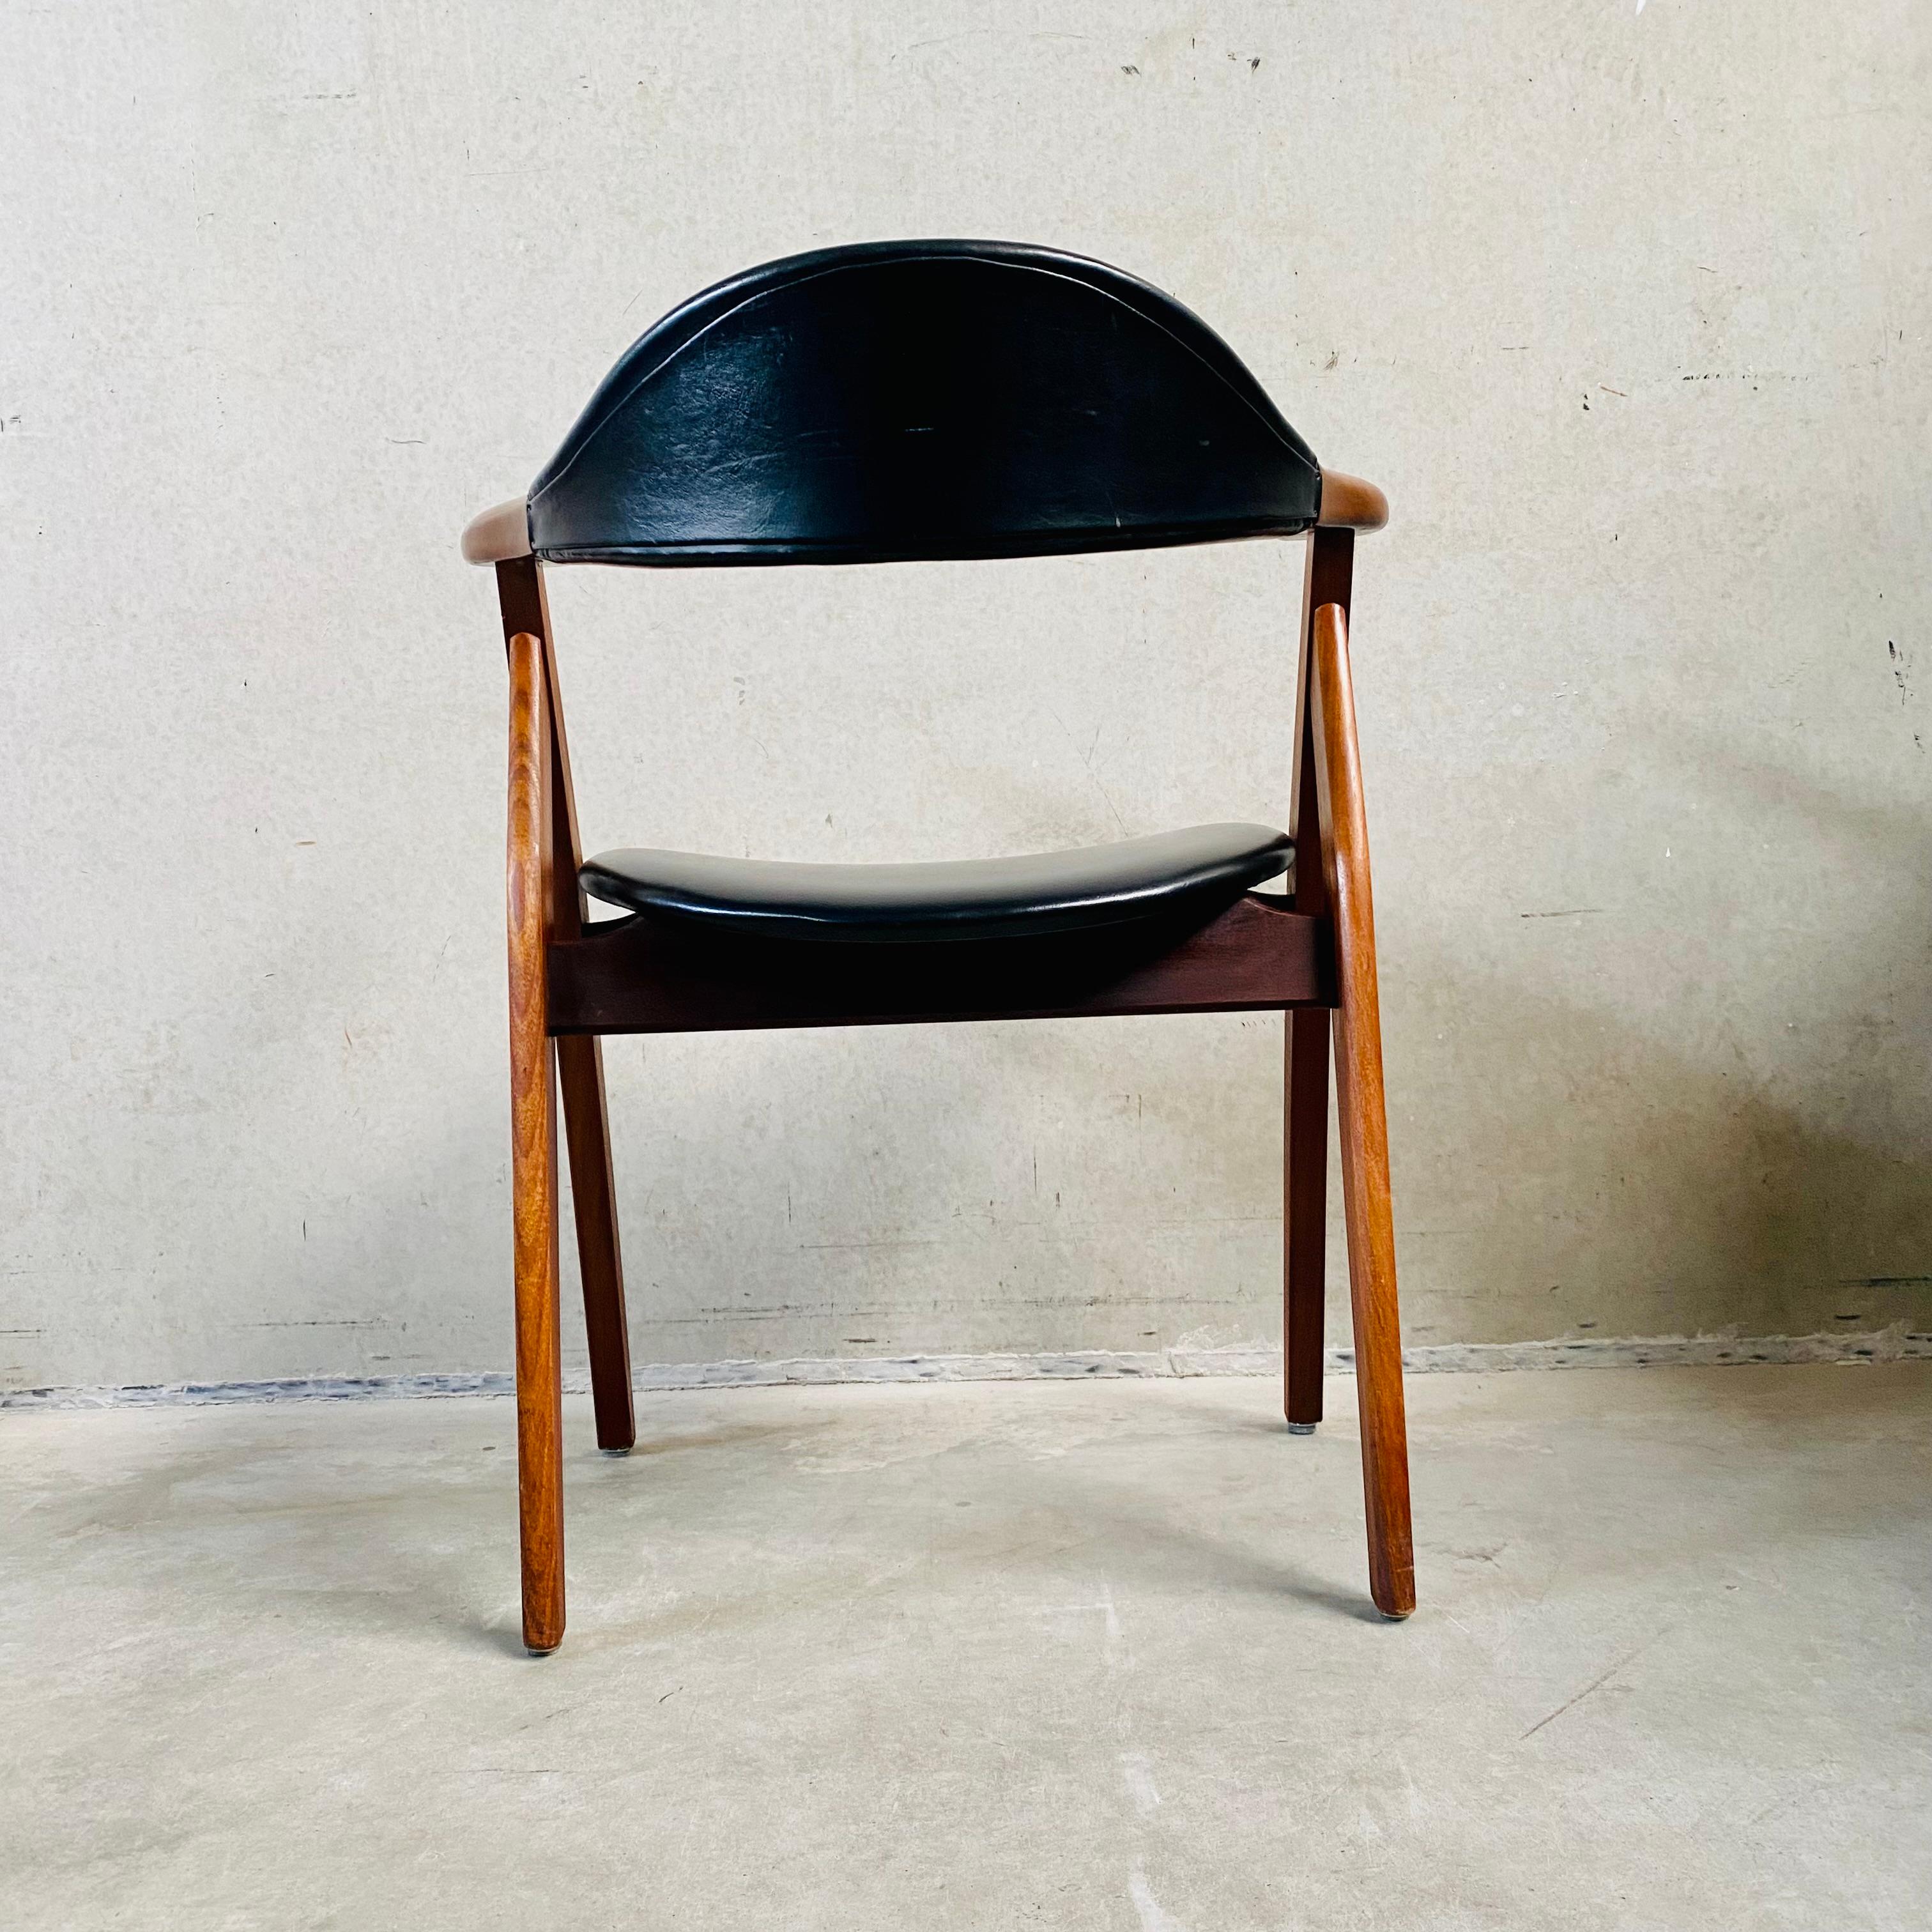 Faux Leather Cow Horn Chair by Tijsseling Meubelfabriek, Netherlands 1960 For Sale